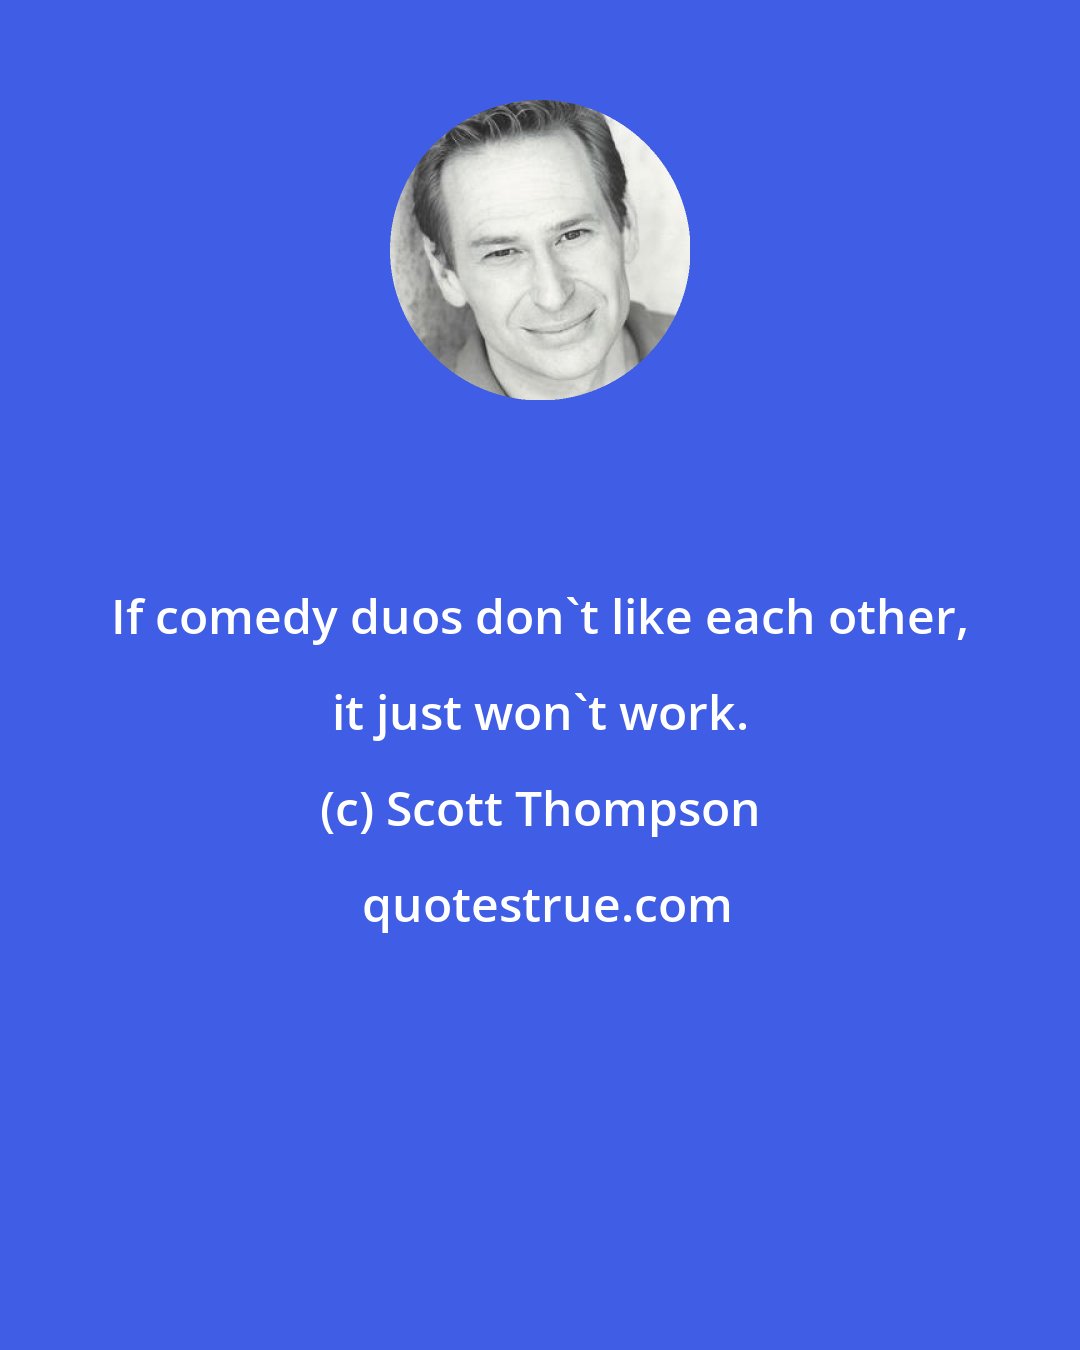 Scott Thompson: If comedy duos don't like each other, it just won't work.